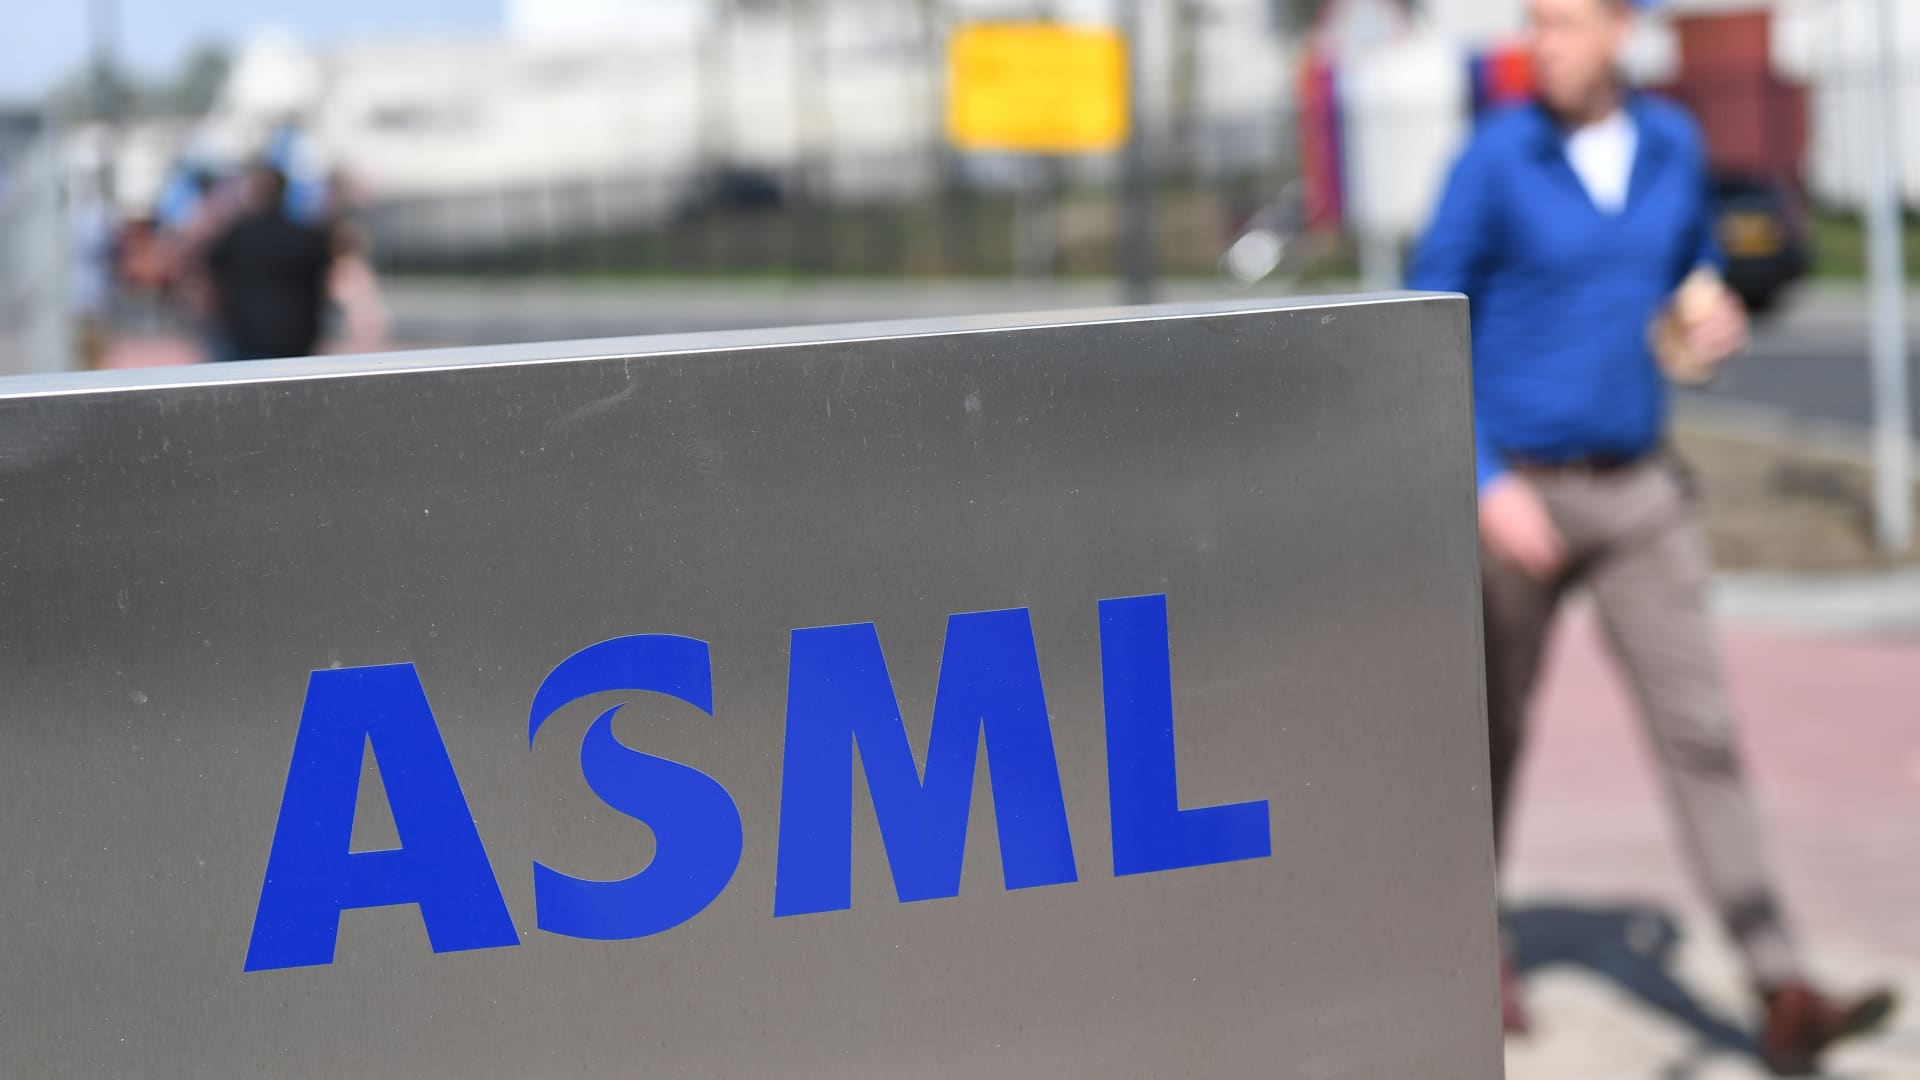 ASML says ex-China employee misappropriated data relating to its critical chip technology